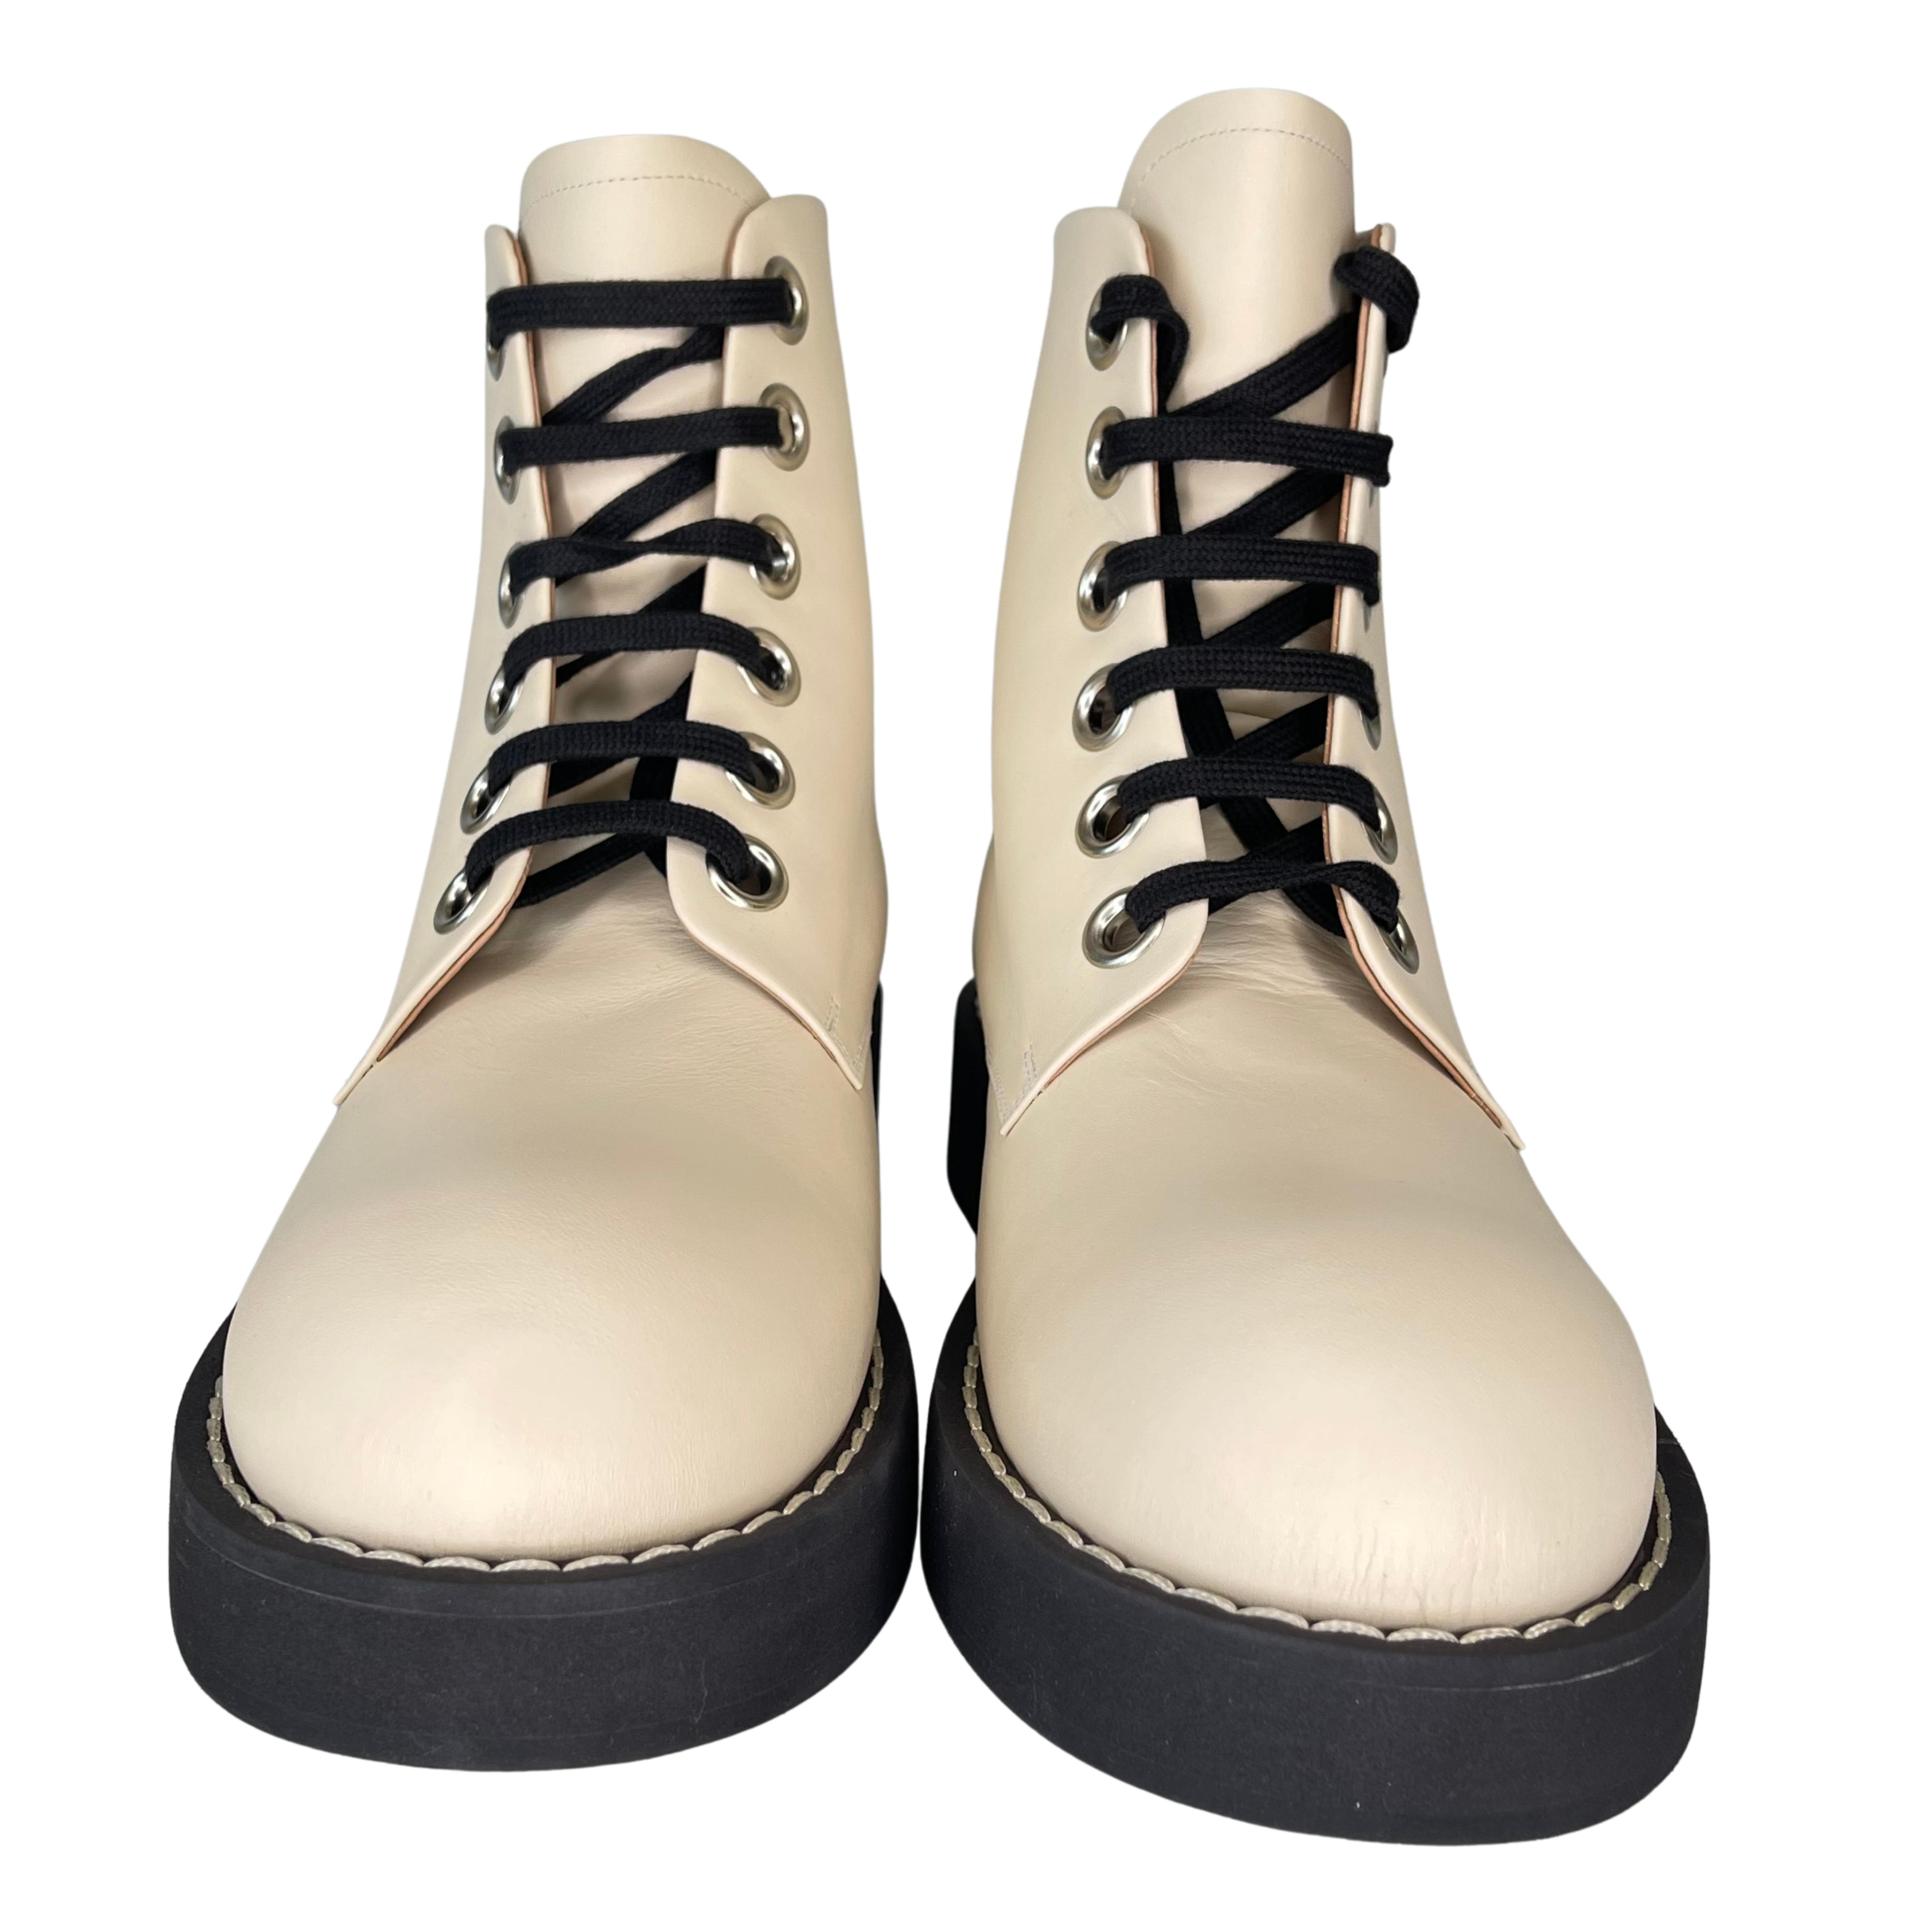 Featuring leather, solid color, laces, round toeline, square heel, leather lining and lug sole.

COLOR: Ivory
MATERIAL: Leather
SIZE: 41 EU / 10 US
CONDITION: New.
COMES WITH: Dust bag and box 

Made in Italy